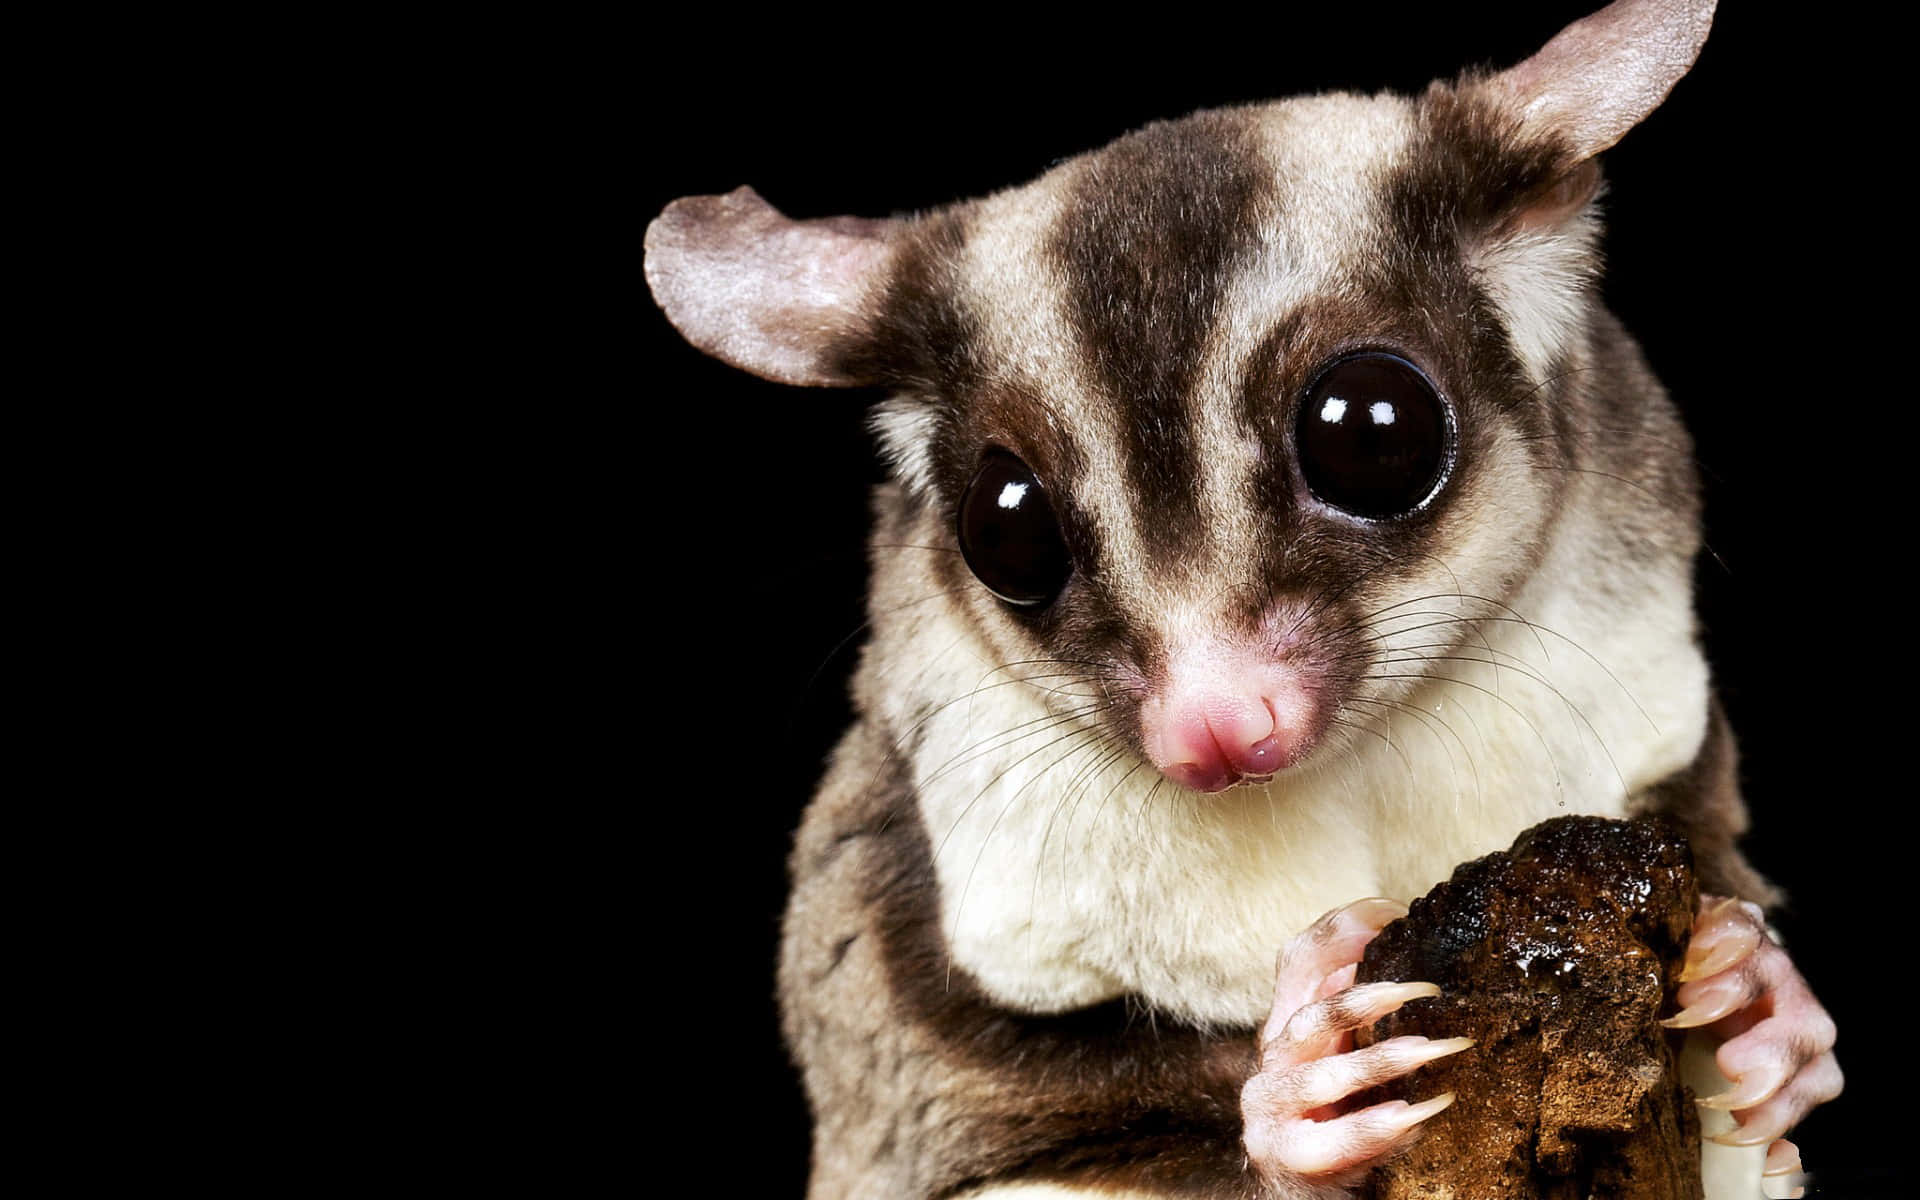 Adorable Sugar Glider Snuggling in Its Natural Environment